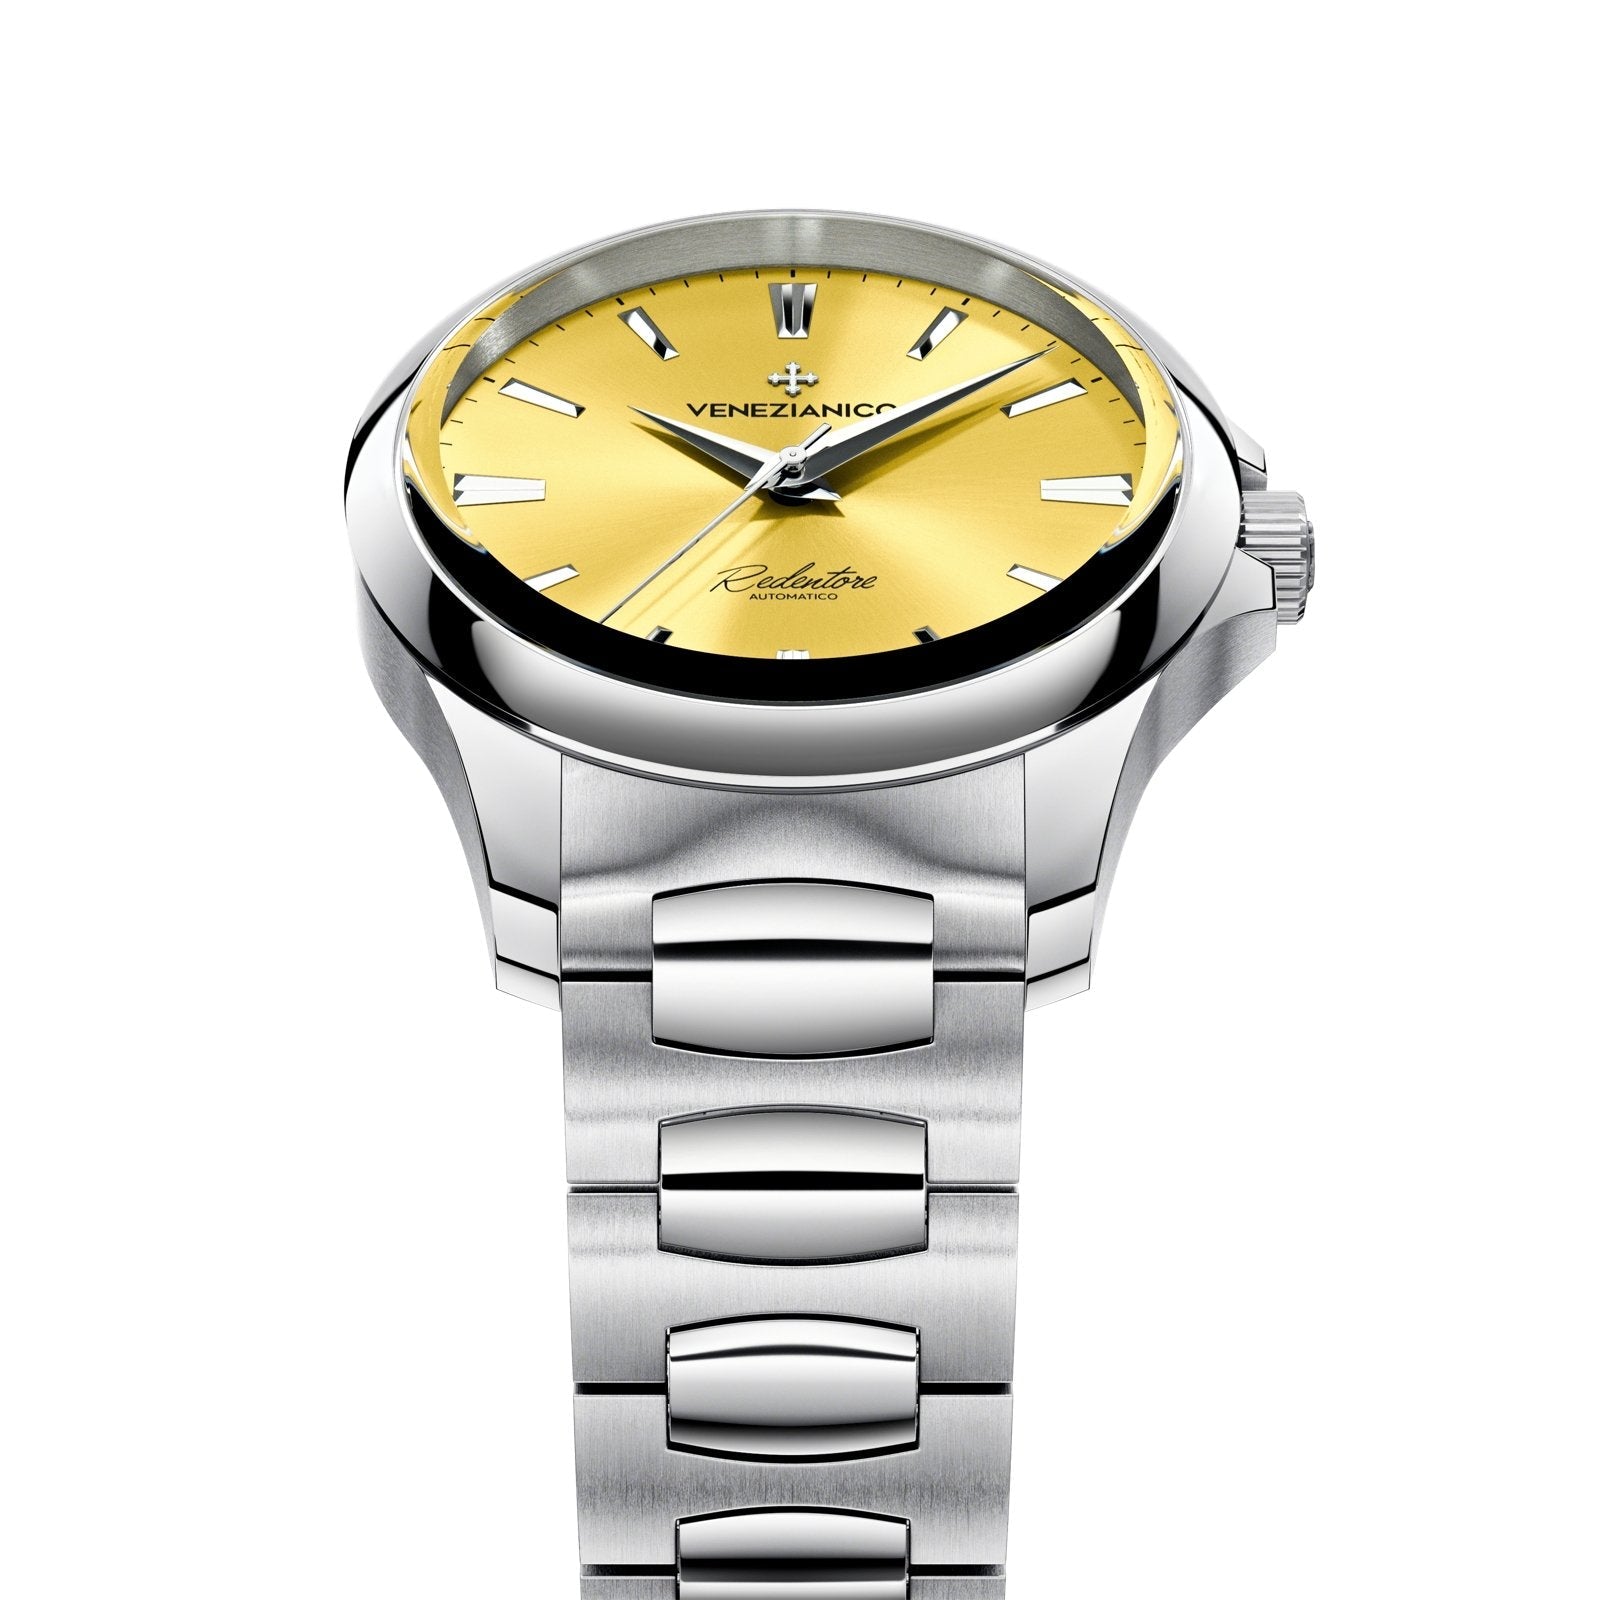 Venezianico Automatic Watch Redentore 36 Yellow Steel 1121501C - Watches & Crystals